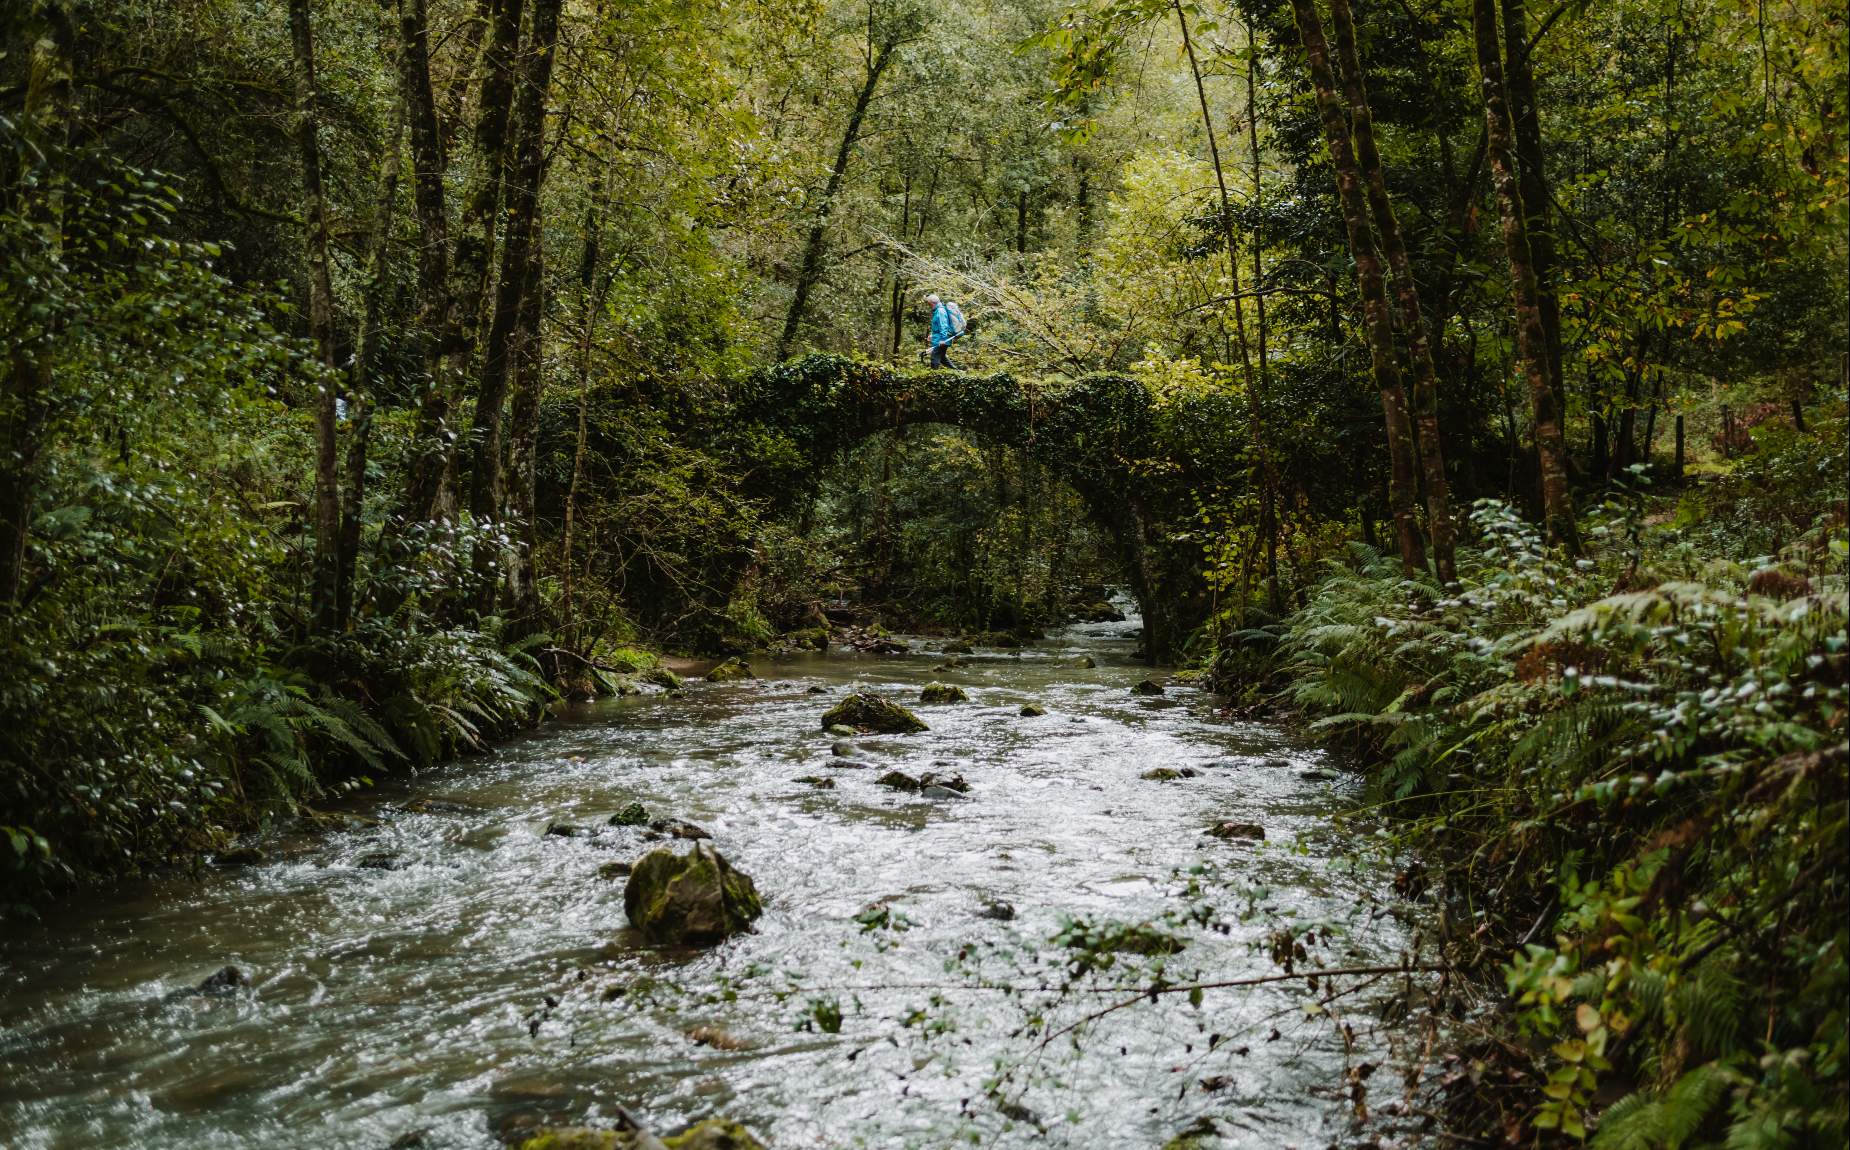 Tourist walking on a bridge in the forest above a river